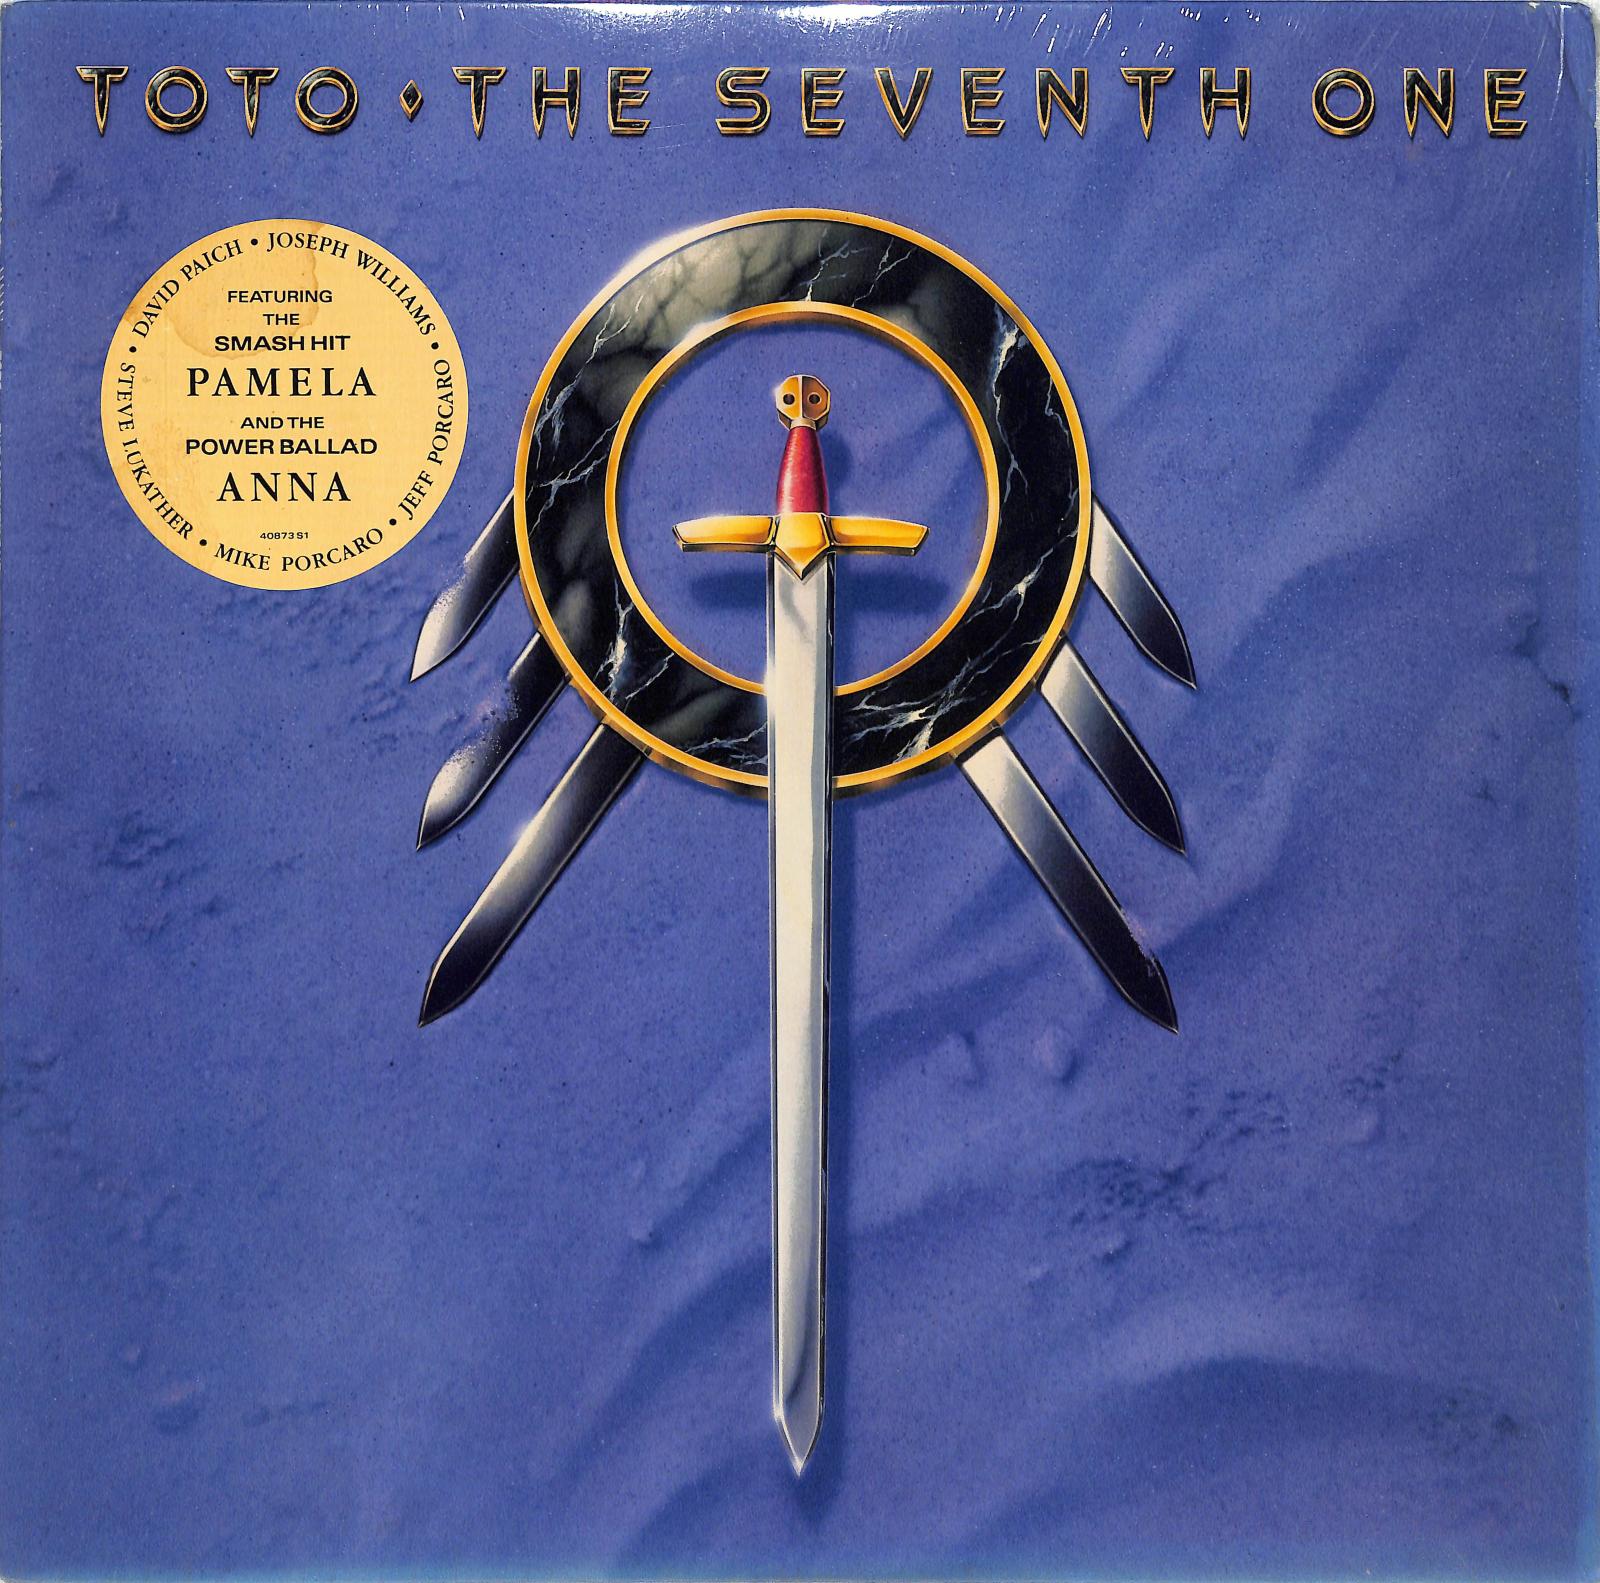 TOTO - The Seventh One